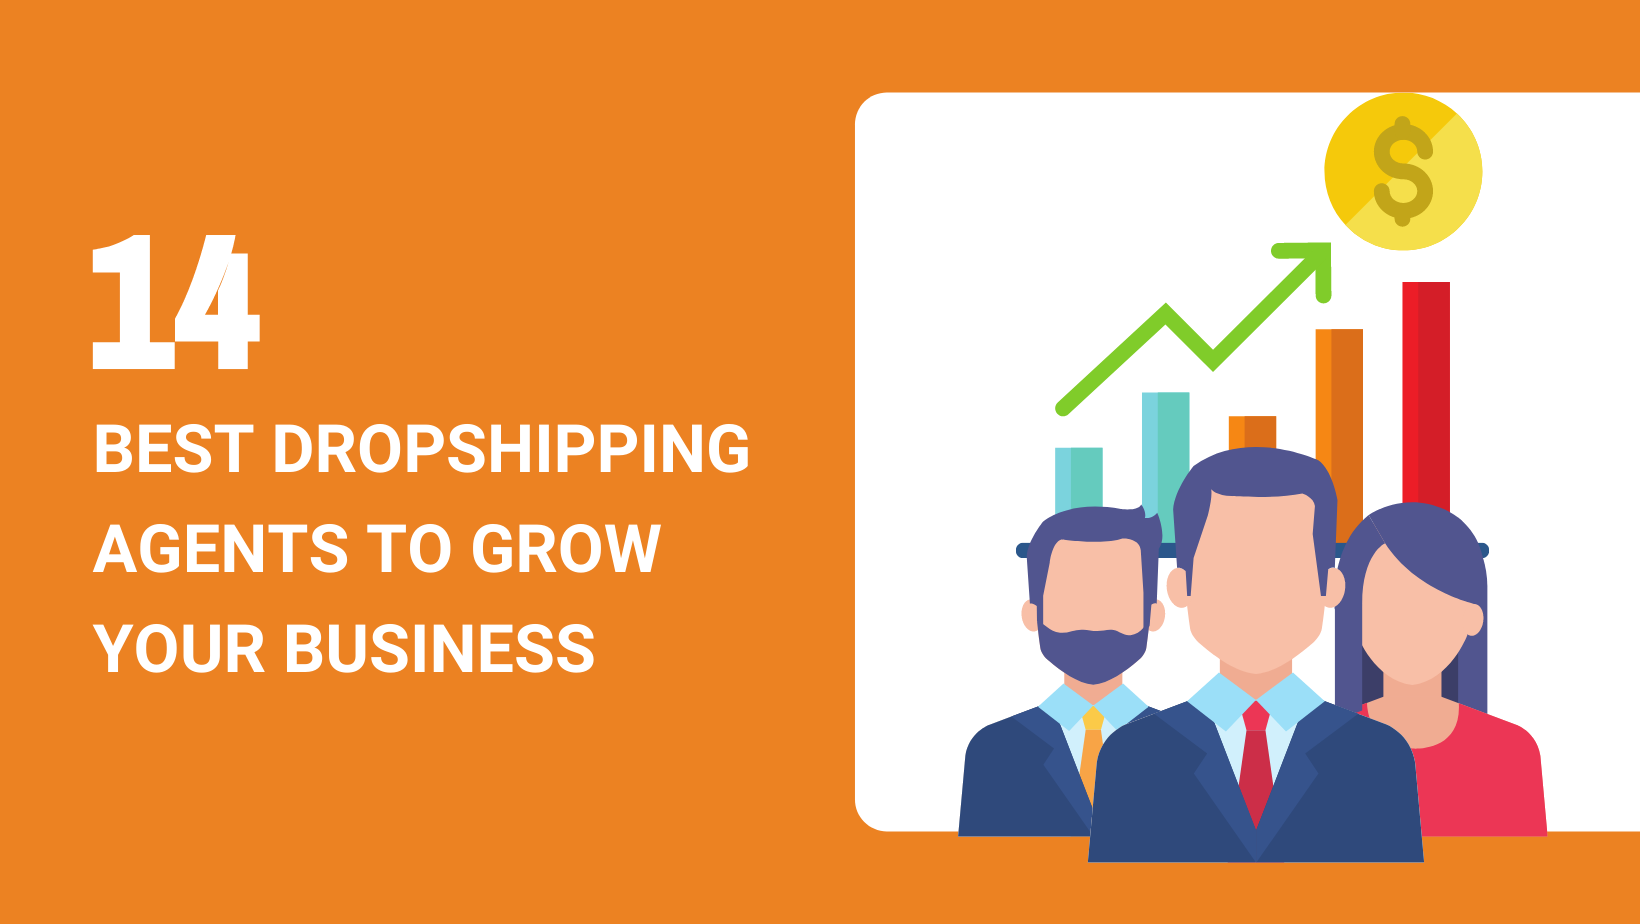 14 BEST DROPSHIPPING AGENTS TO GROW YOUR BUSINESS